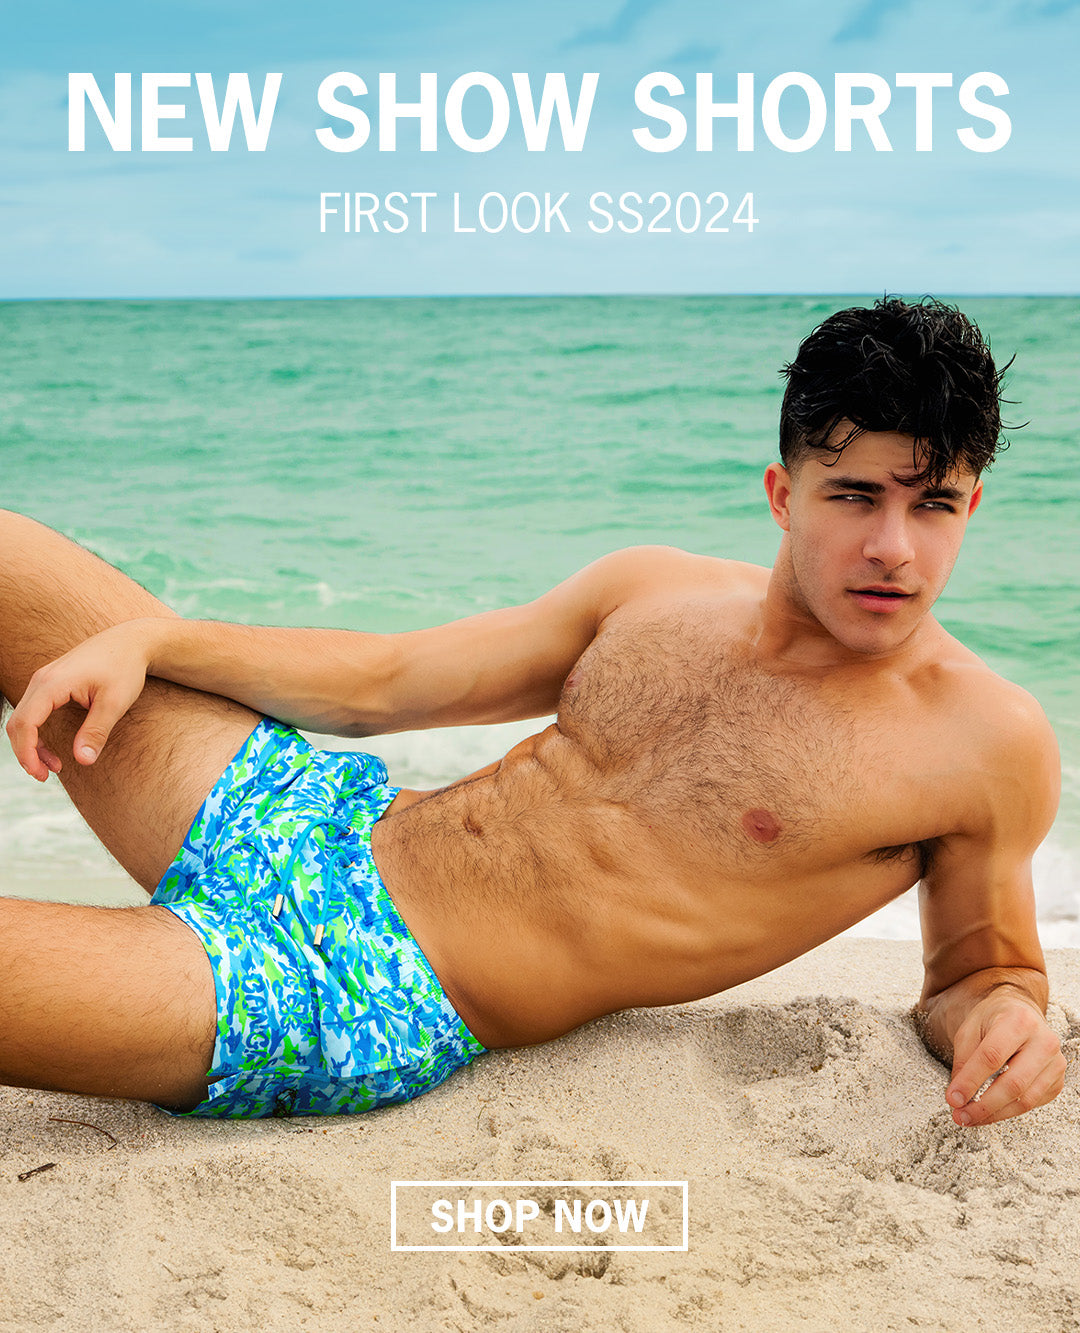 New with Tags Men's Swim Trunks - clothing & accessories - by